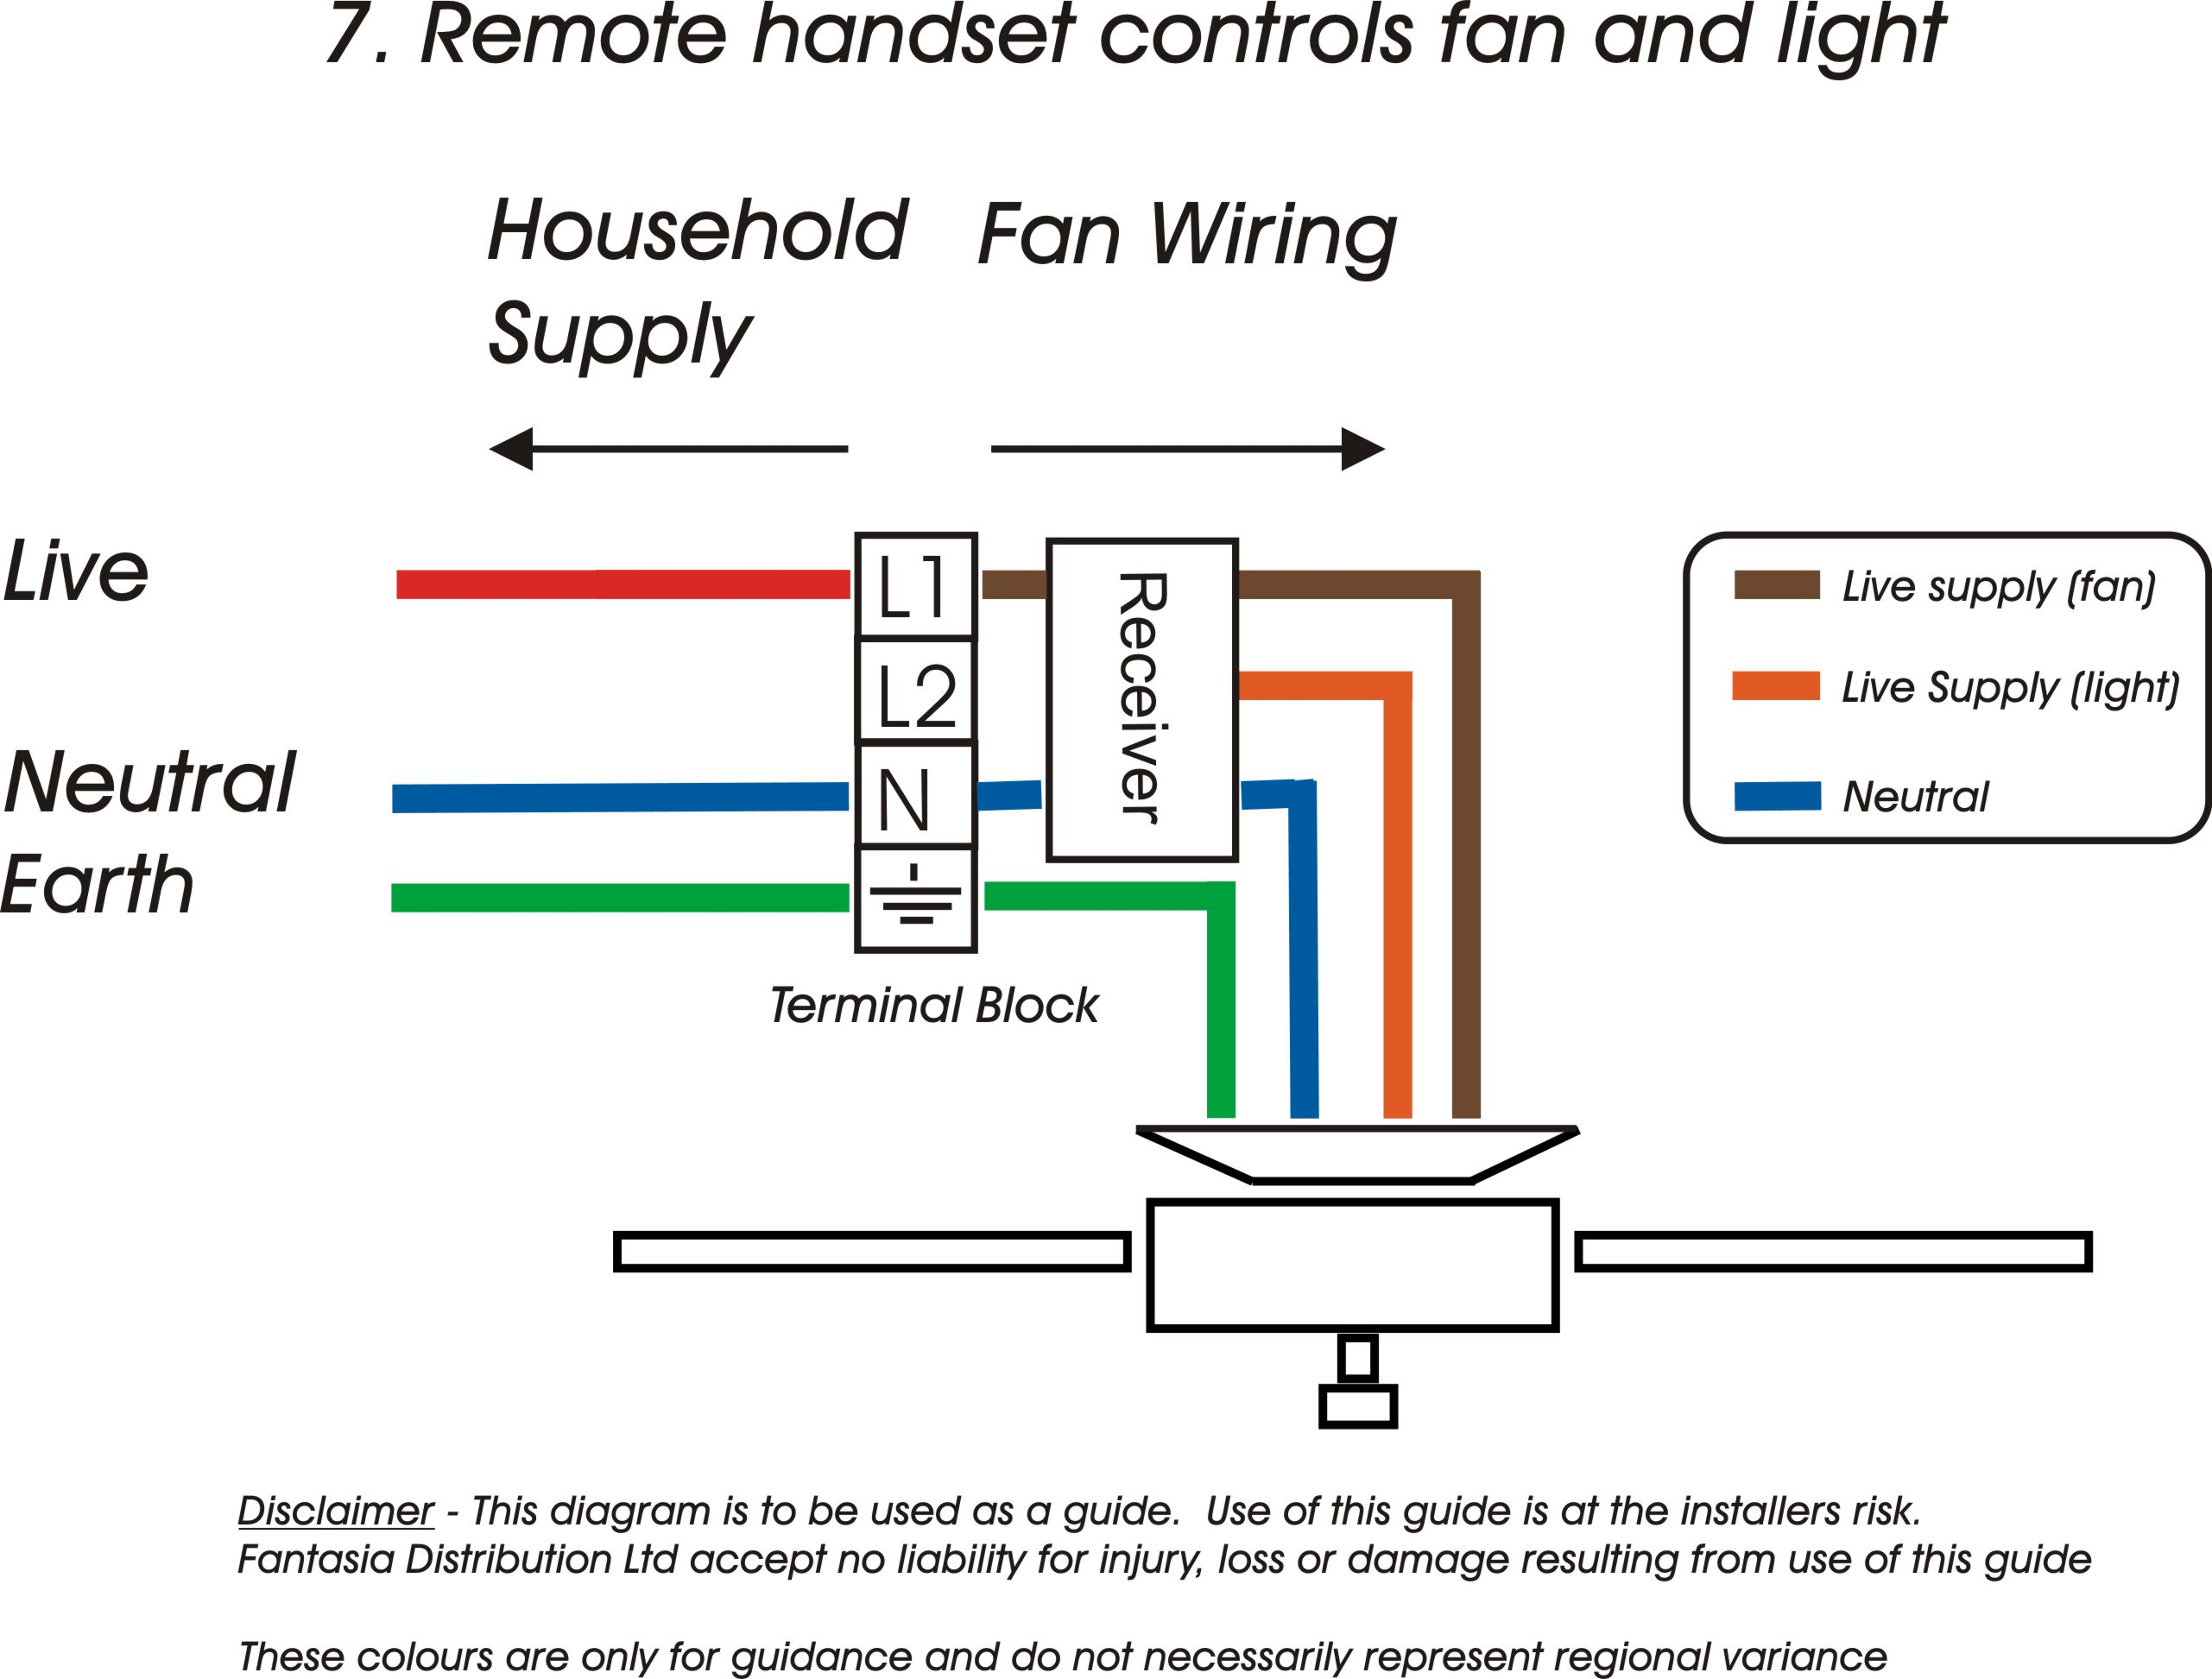 Fantasia Fans | Fantasia Ceiling Fans Wiring Information - Wiring Diagram For Ceiling Fan With Lights